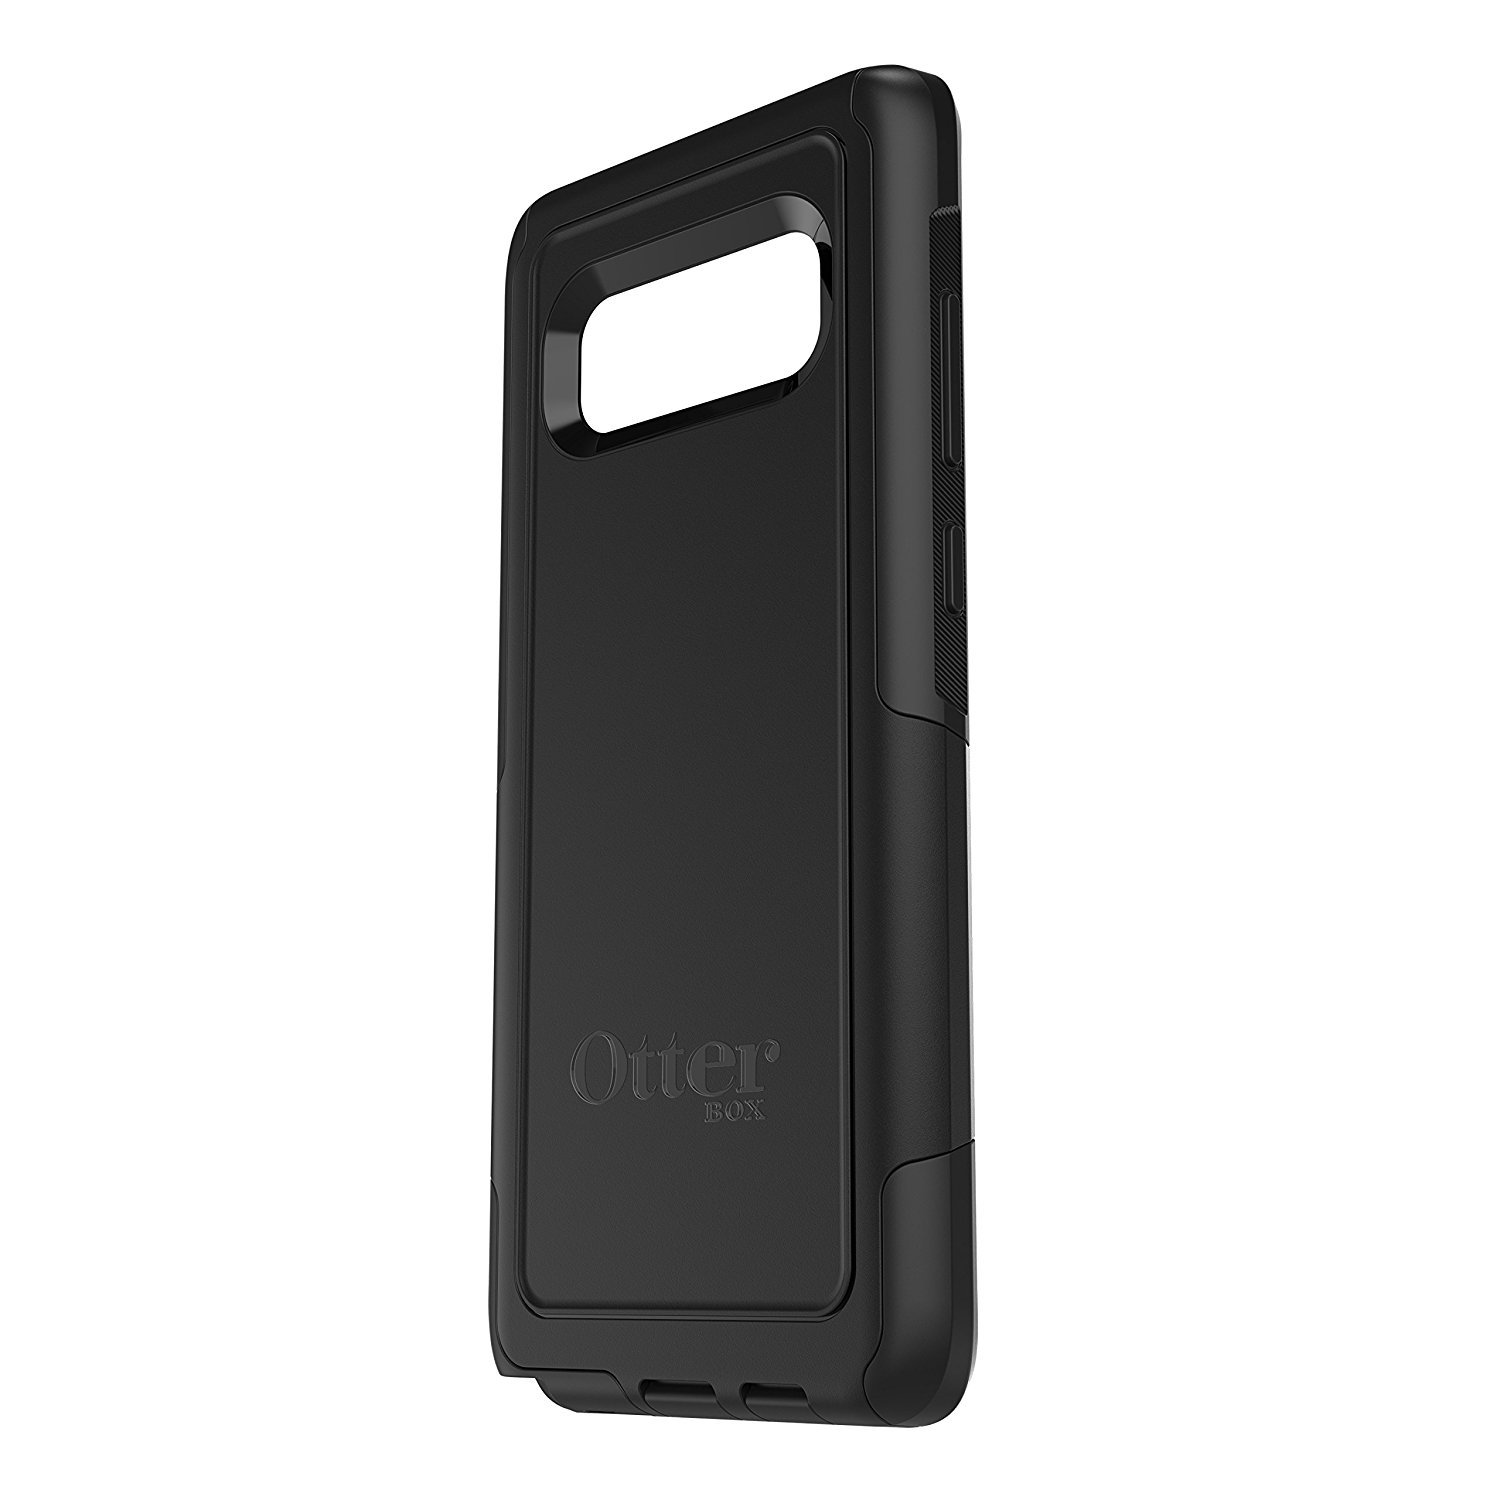 Otterbox Commuter Case for Note 8